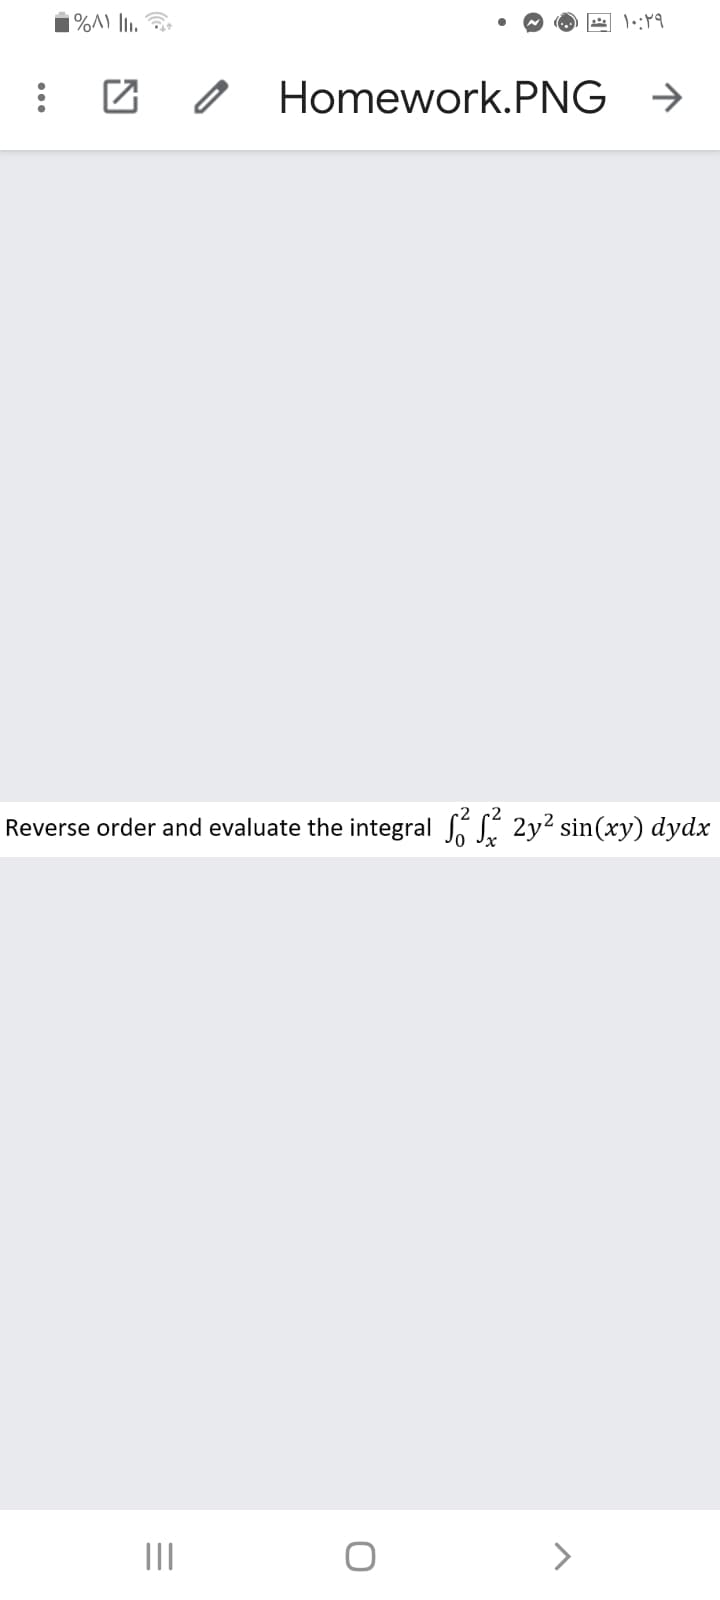 Homework.PNG →
Reverse order and evaluate the integral 2y² sin(xy) dydx
III
>
